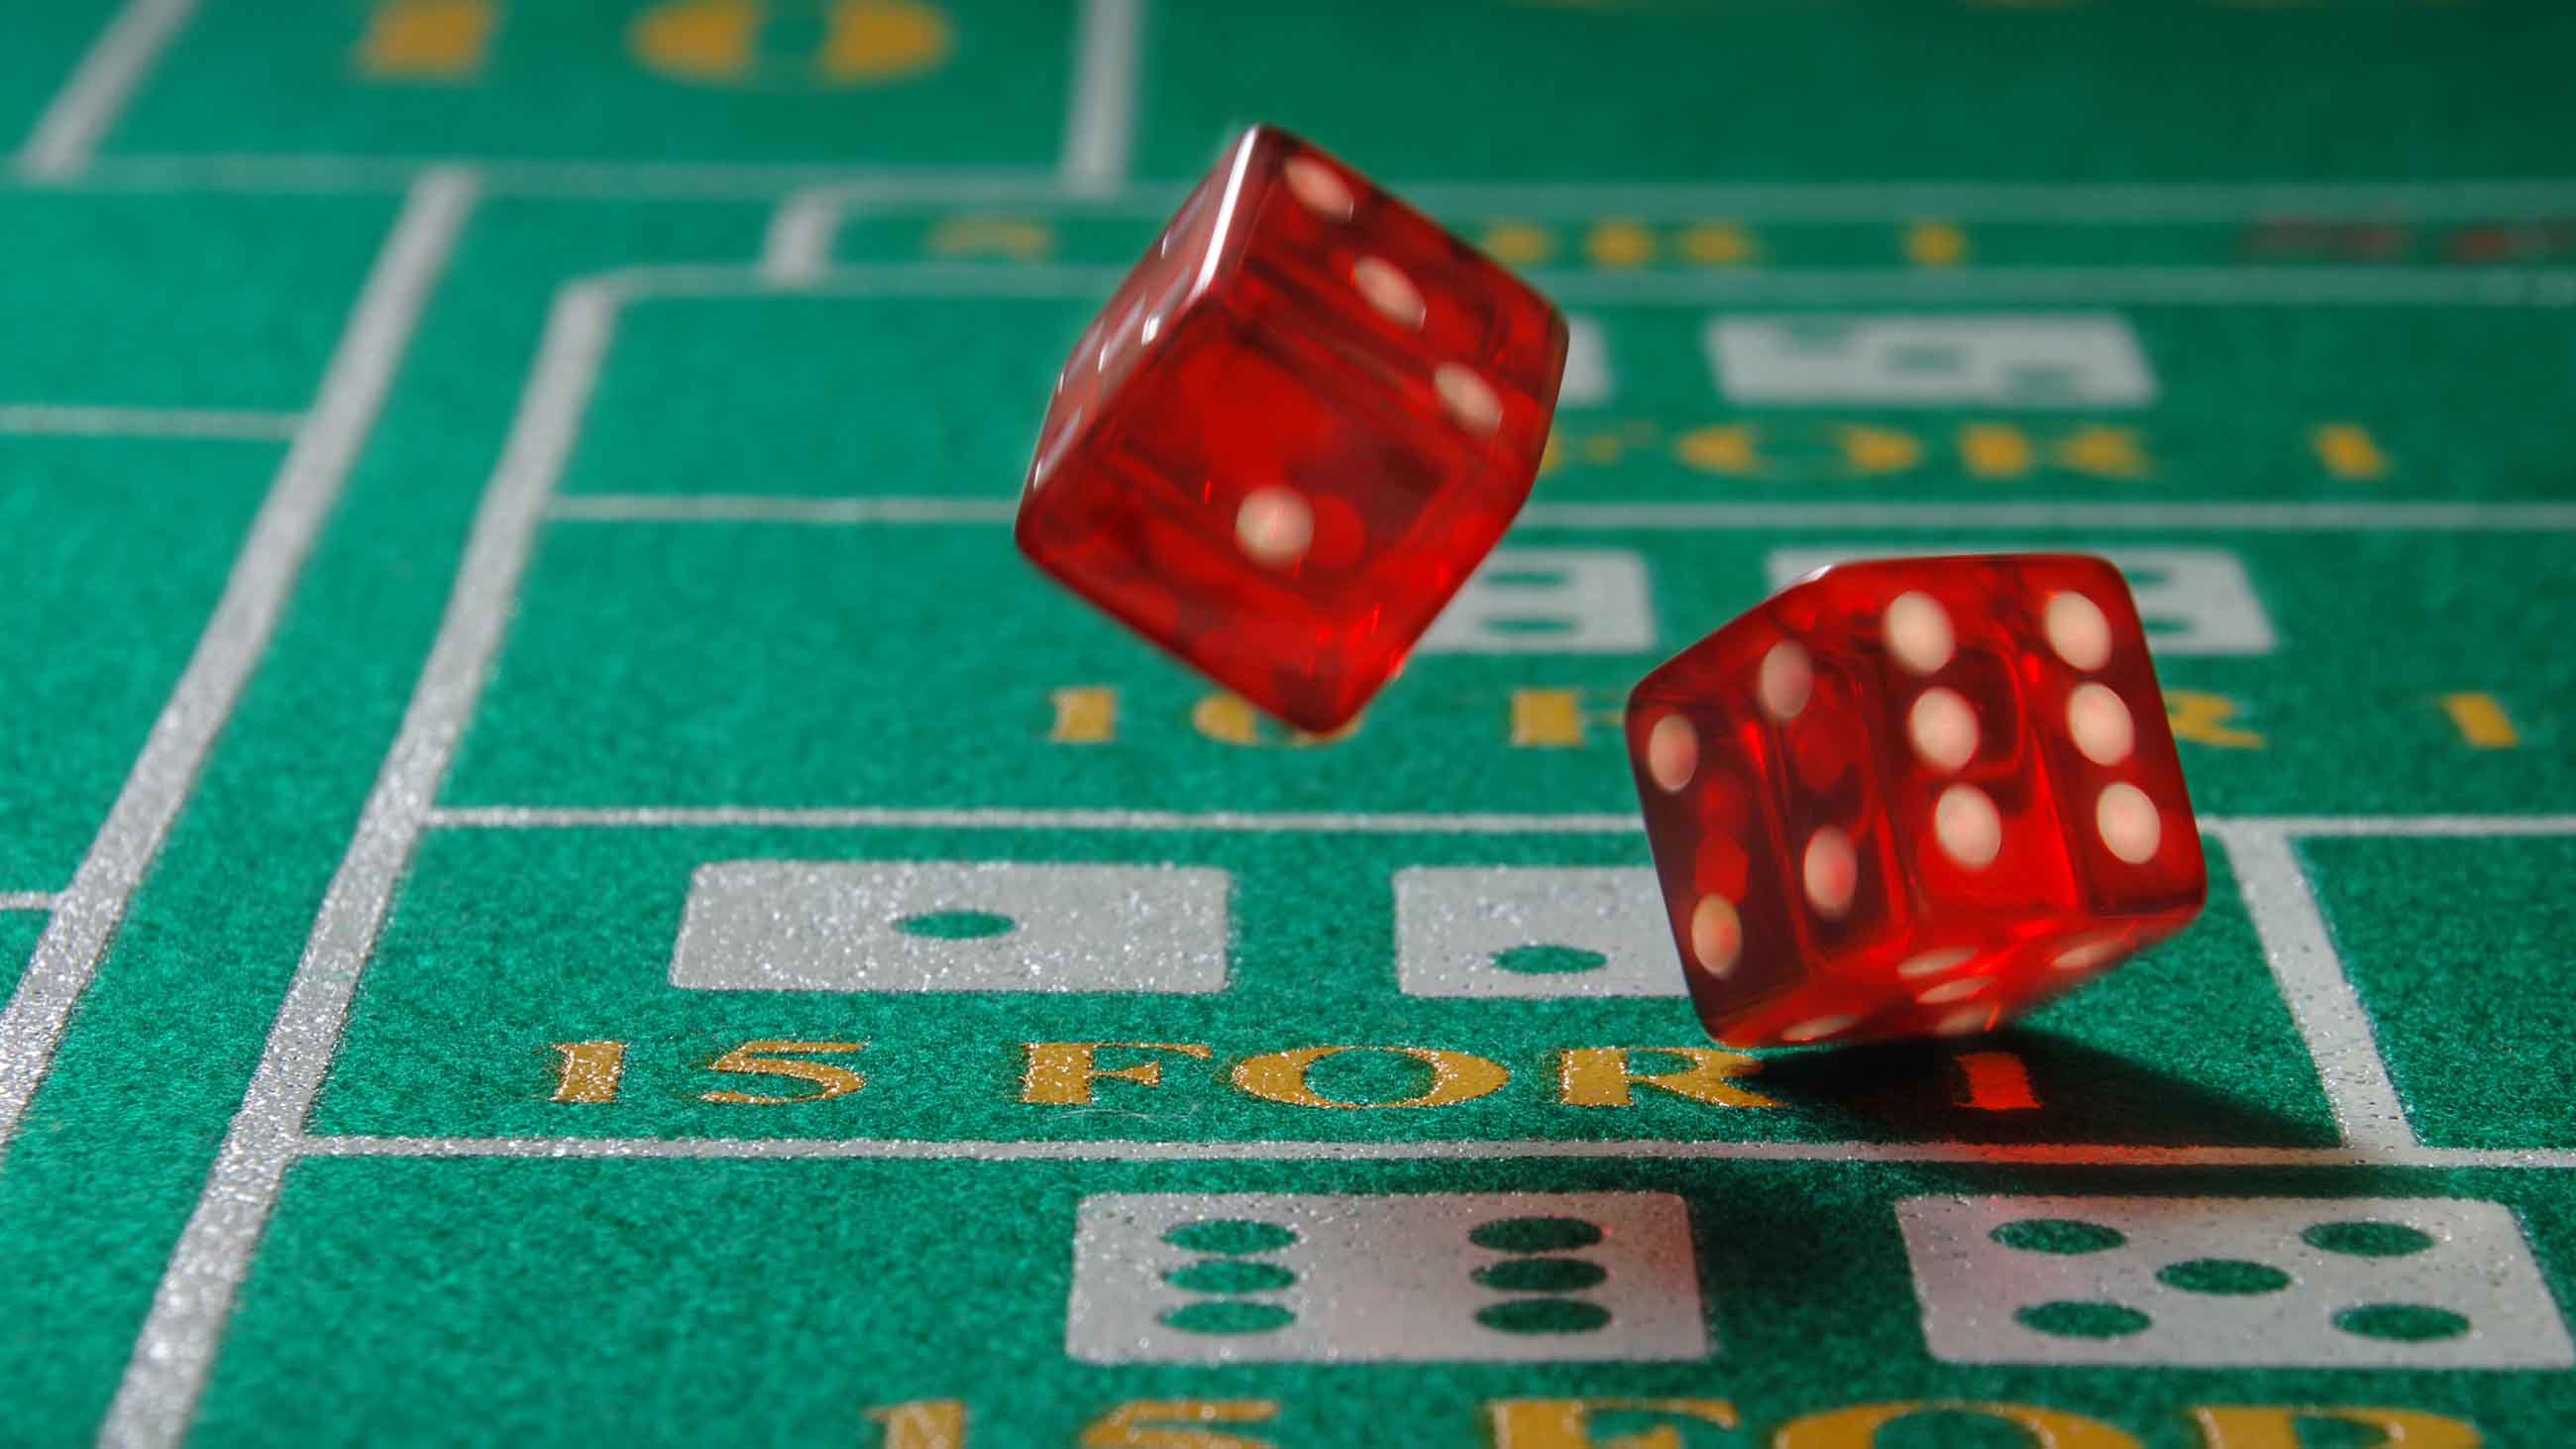 Gambling superstitions, religious prayers, and other rituals, writes Dimitris Xygalatas, "all seem to share some
key structural elements."